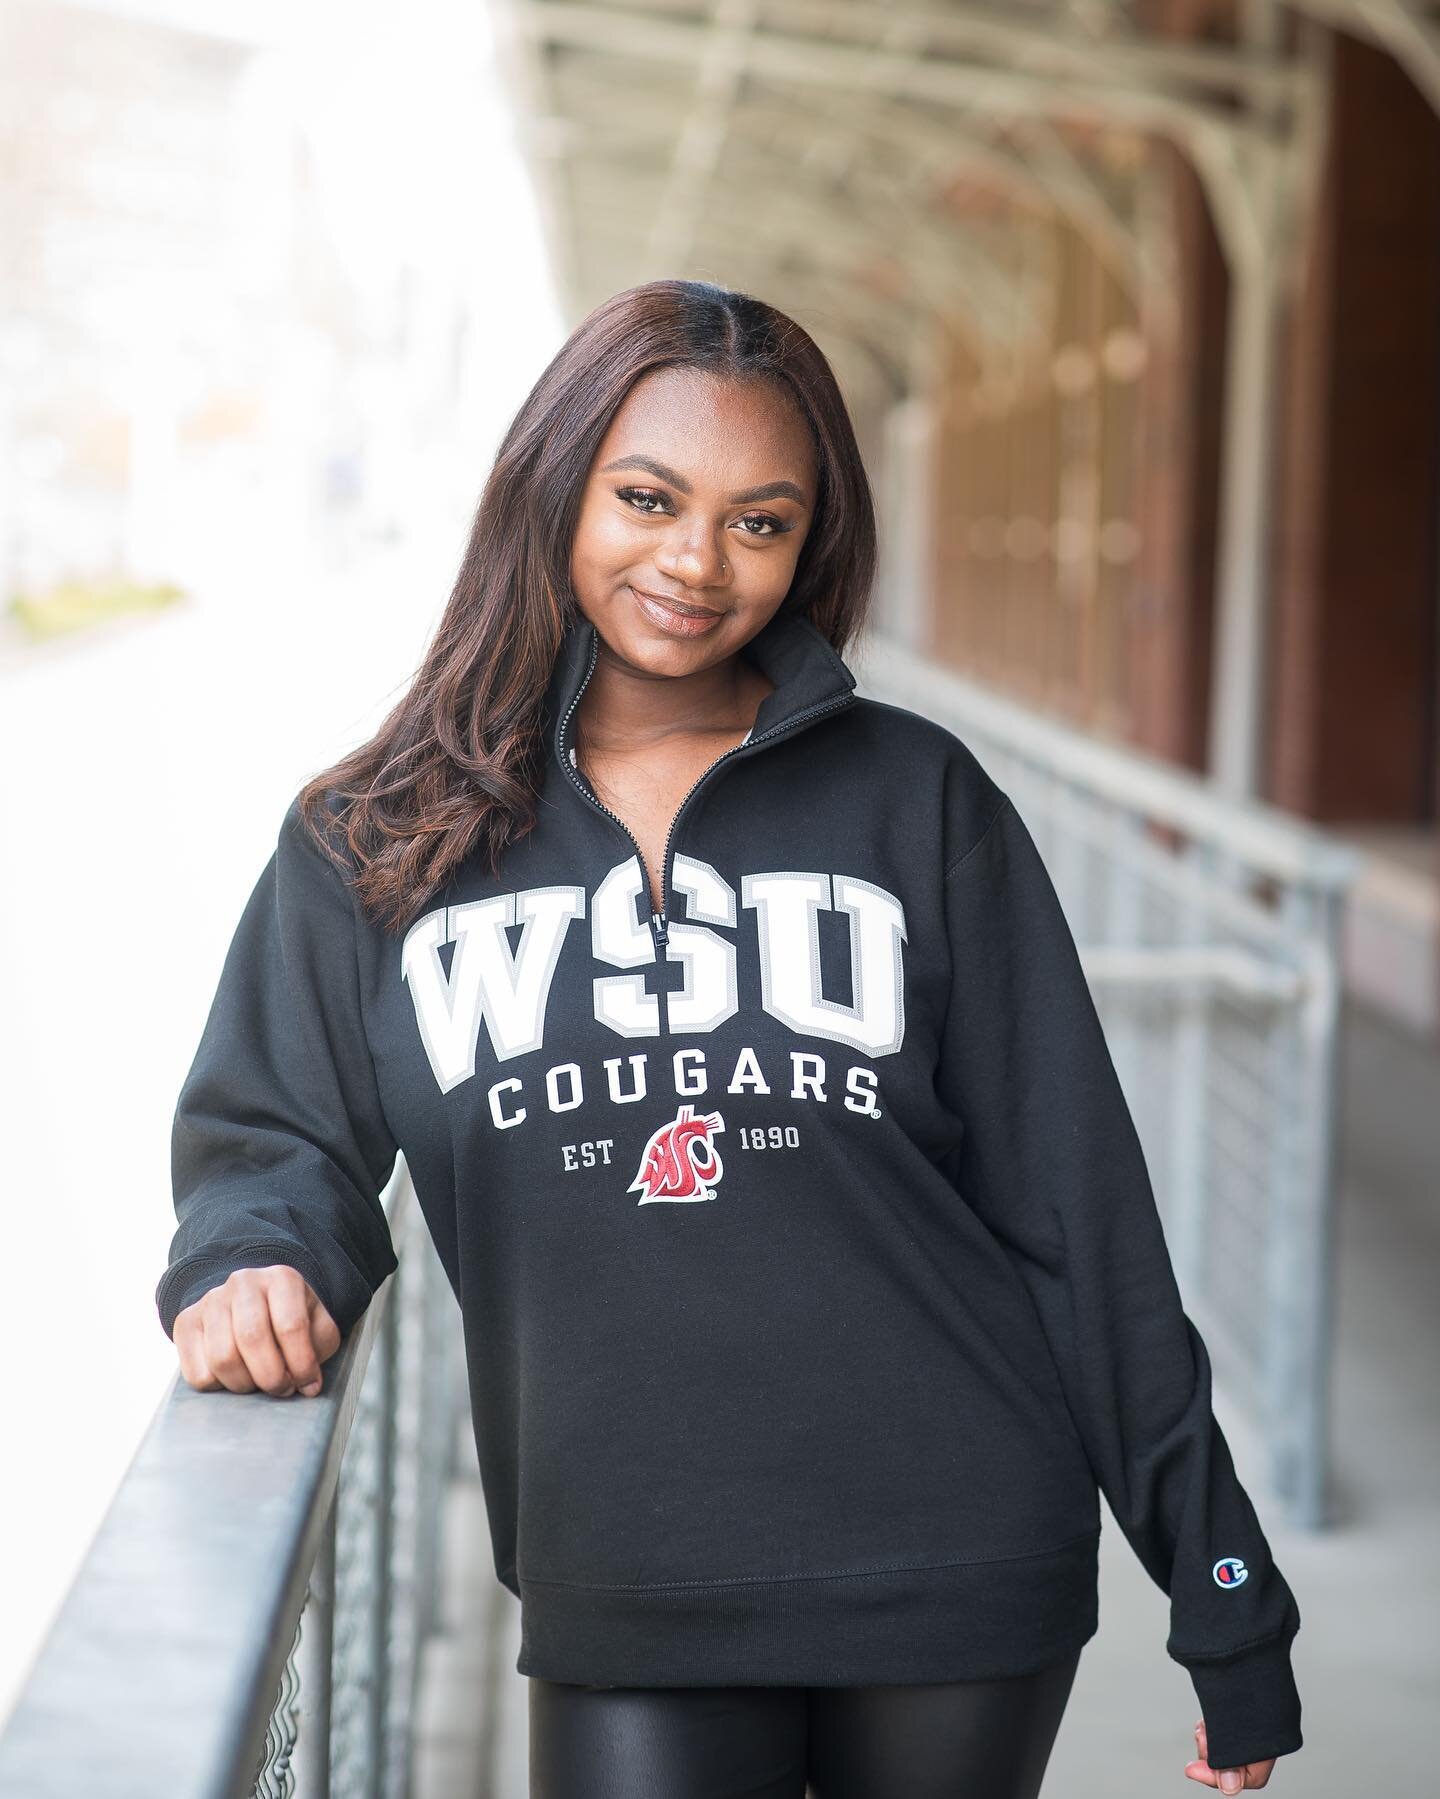 What school are you repping? To the class of 2023, it&rsquo;s time to grab your intended college gear and take some photos! Now booking&hellip; DM/Email to schedule your session! 
___________________
#KaribaPhotography #collegelife #SeattlePhotograph